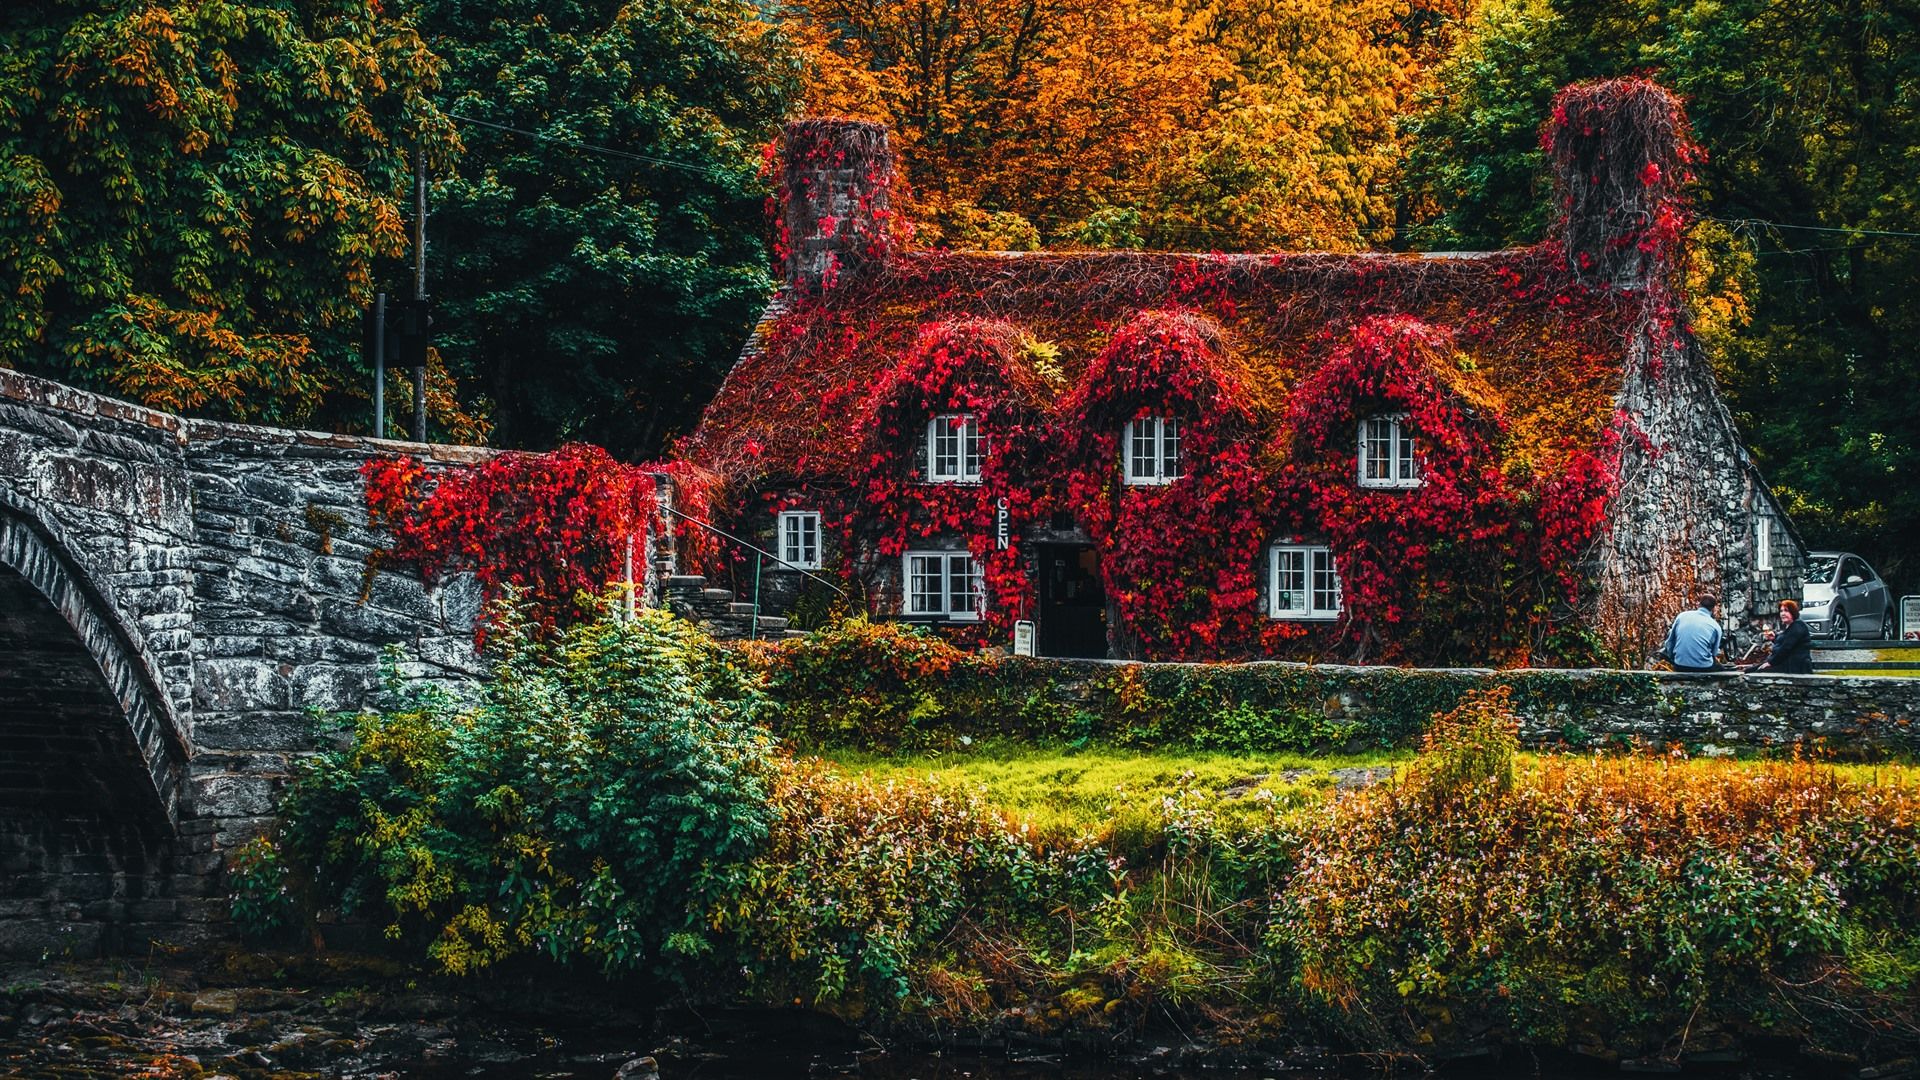 Wallpaper Autumn, red leaves covered the house, bridge, trees 5120x2880 UHD 5K Picture, Image